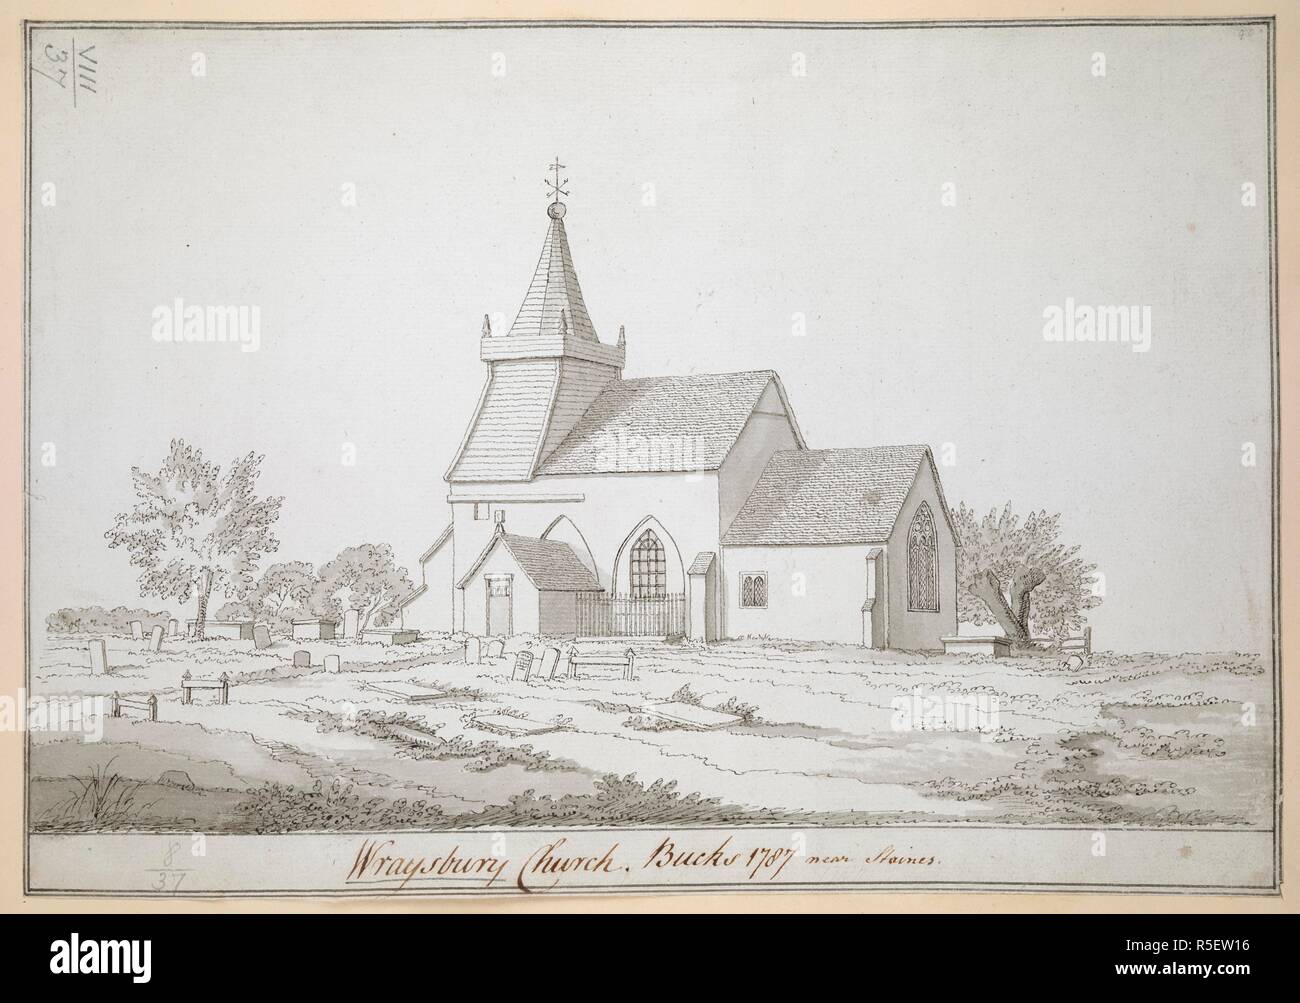 St. Andrew's Church, Wraysbury; the graveyard in the foreground and to the left; trees behind. Wraysbury Church, Bucks 1787 near Staines. 1787. Source: Maps K.Top.8.37. Language: English. Author: Grimm, Samuel Hieronymous. Stock Photo